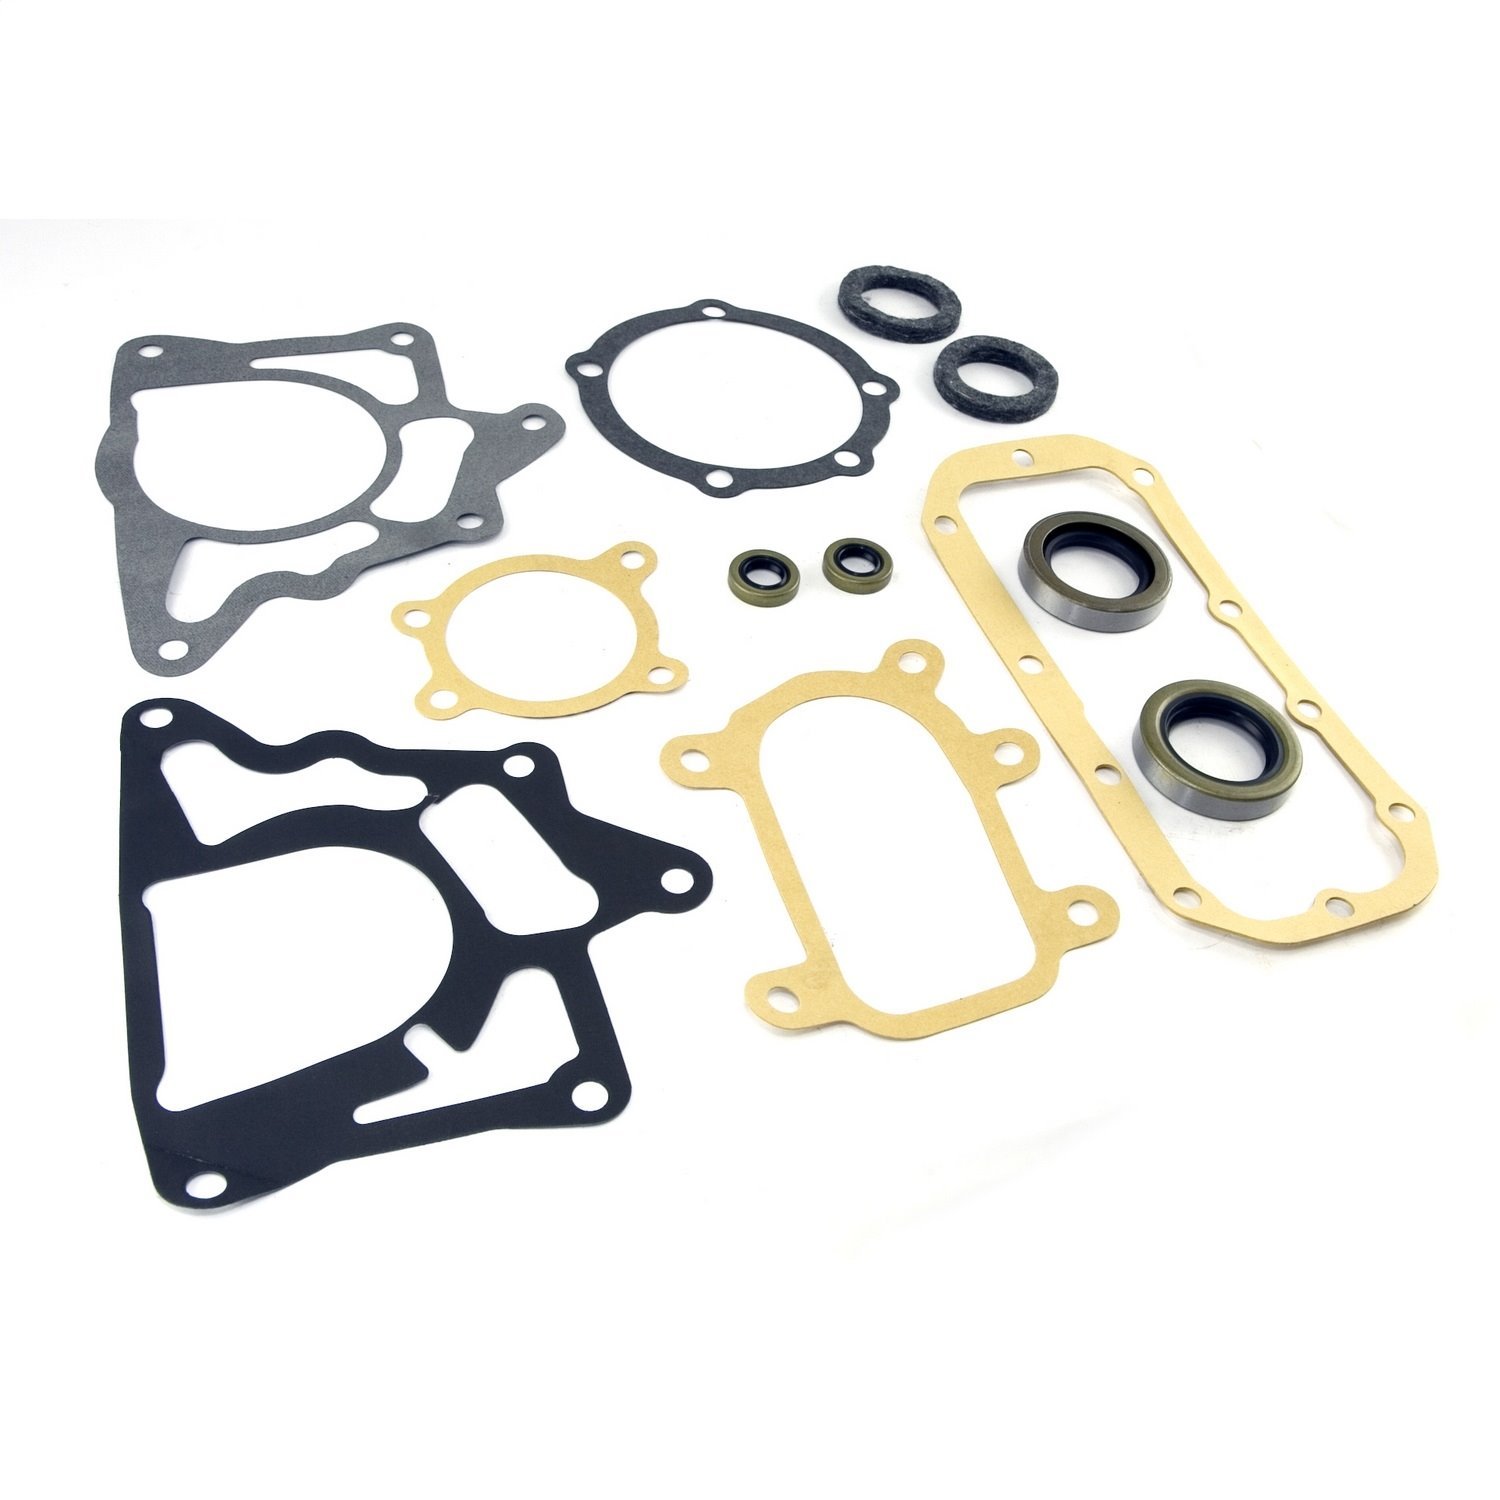 This transfer case gasket and seal kit from Omix-ADA fits 41-71 Willys and Jeep models with Dana 18 transfer case.